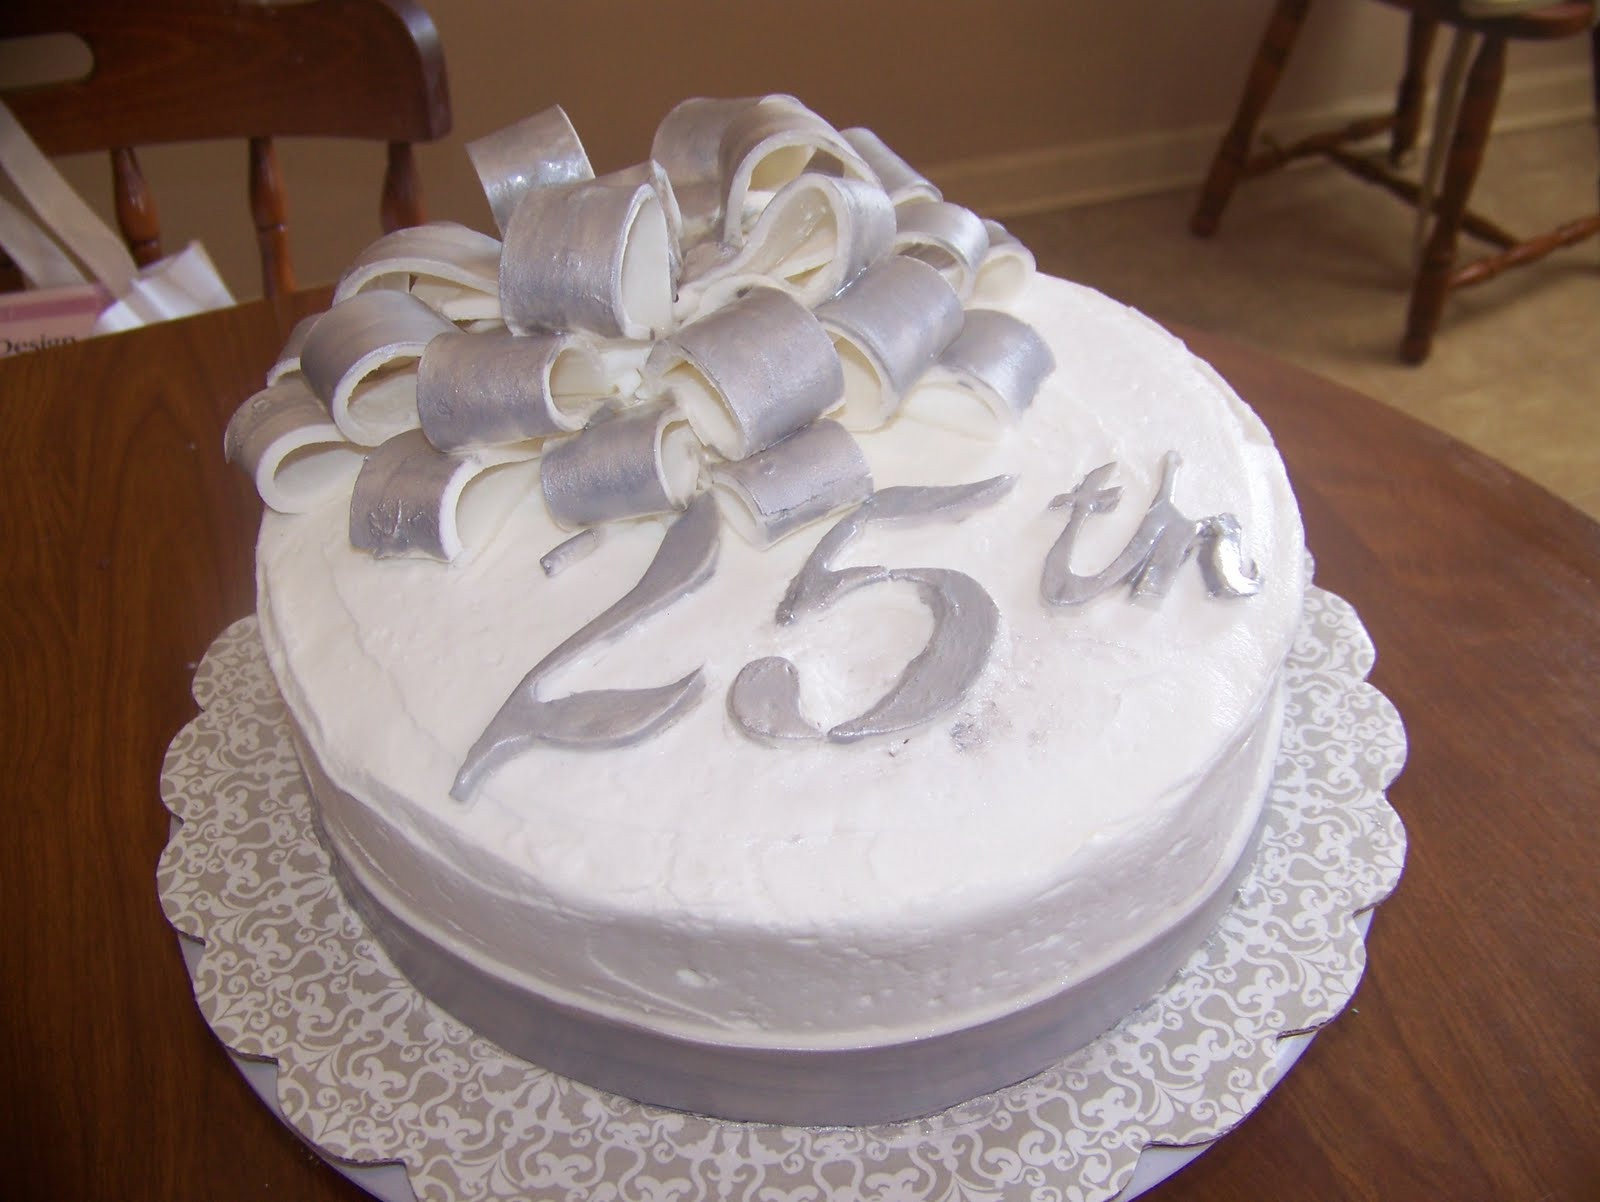 25th Wedding Anniversary Cakes
 How to Throw a Memorable 25th Wedding Anniversary Party